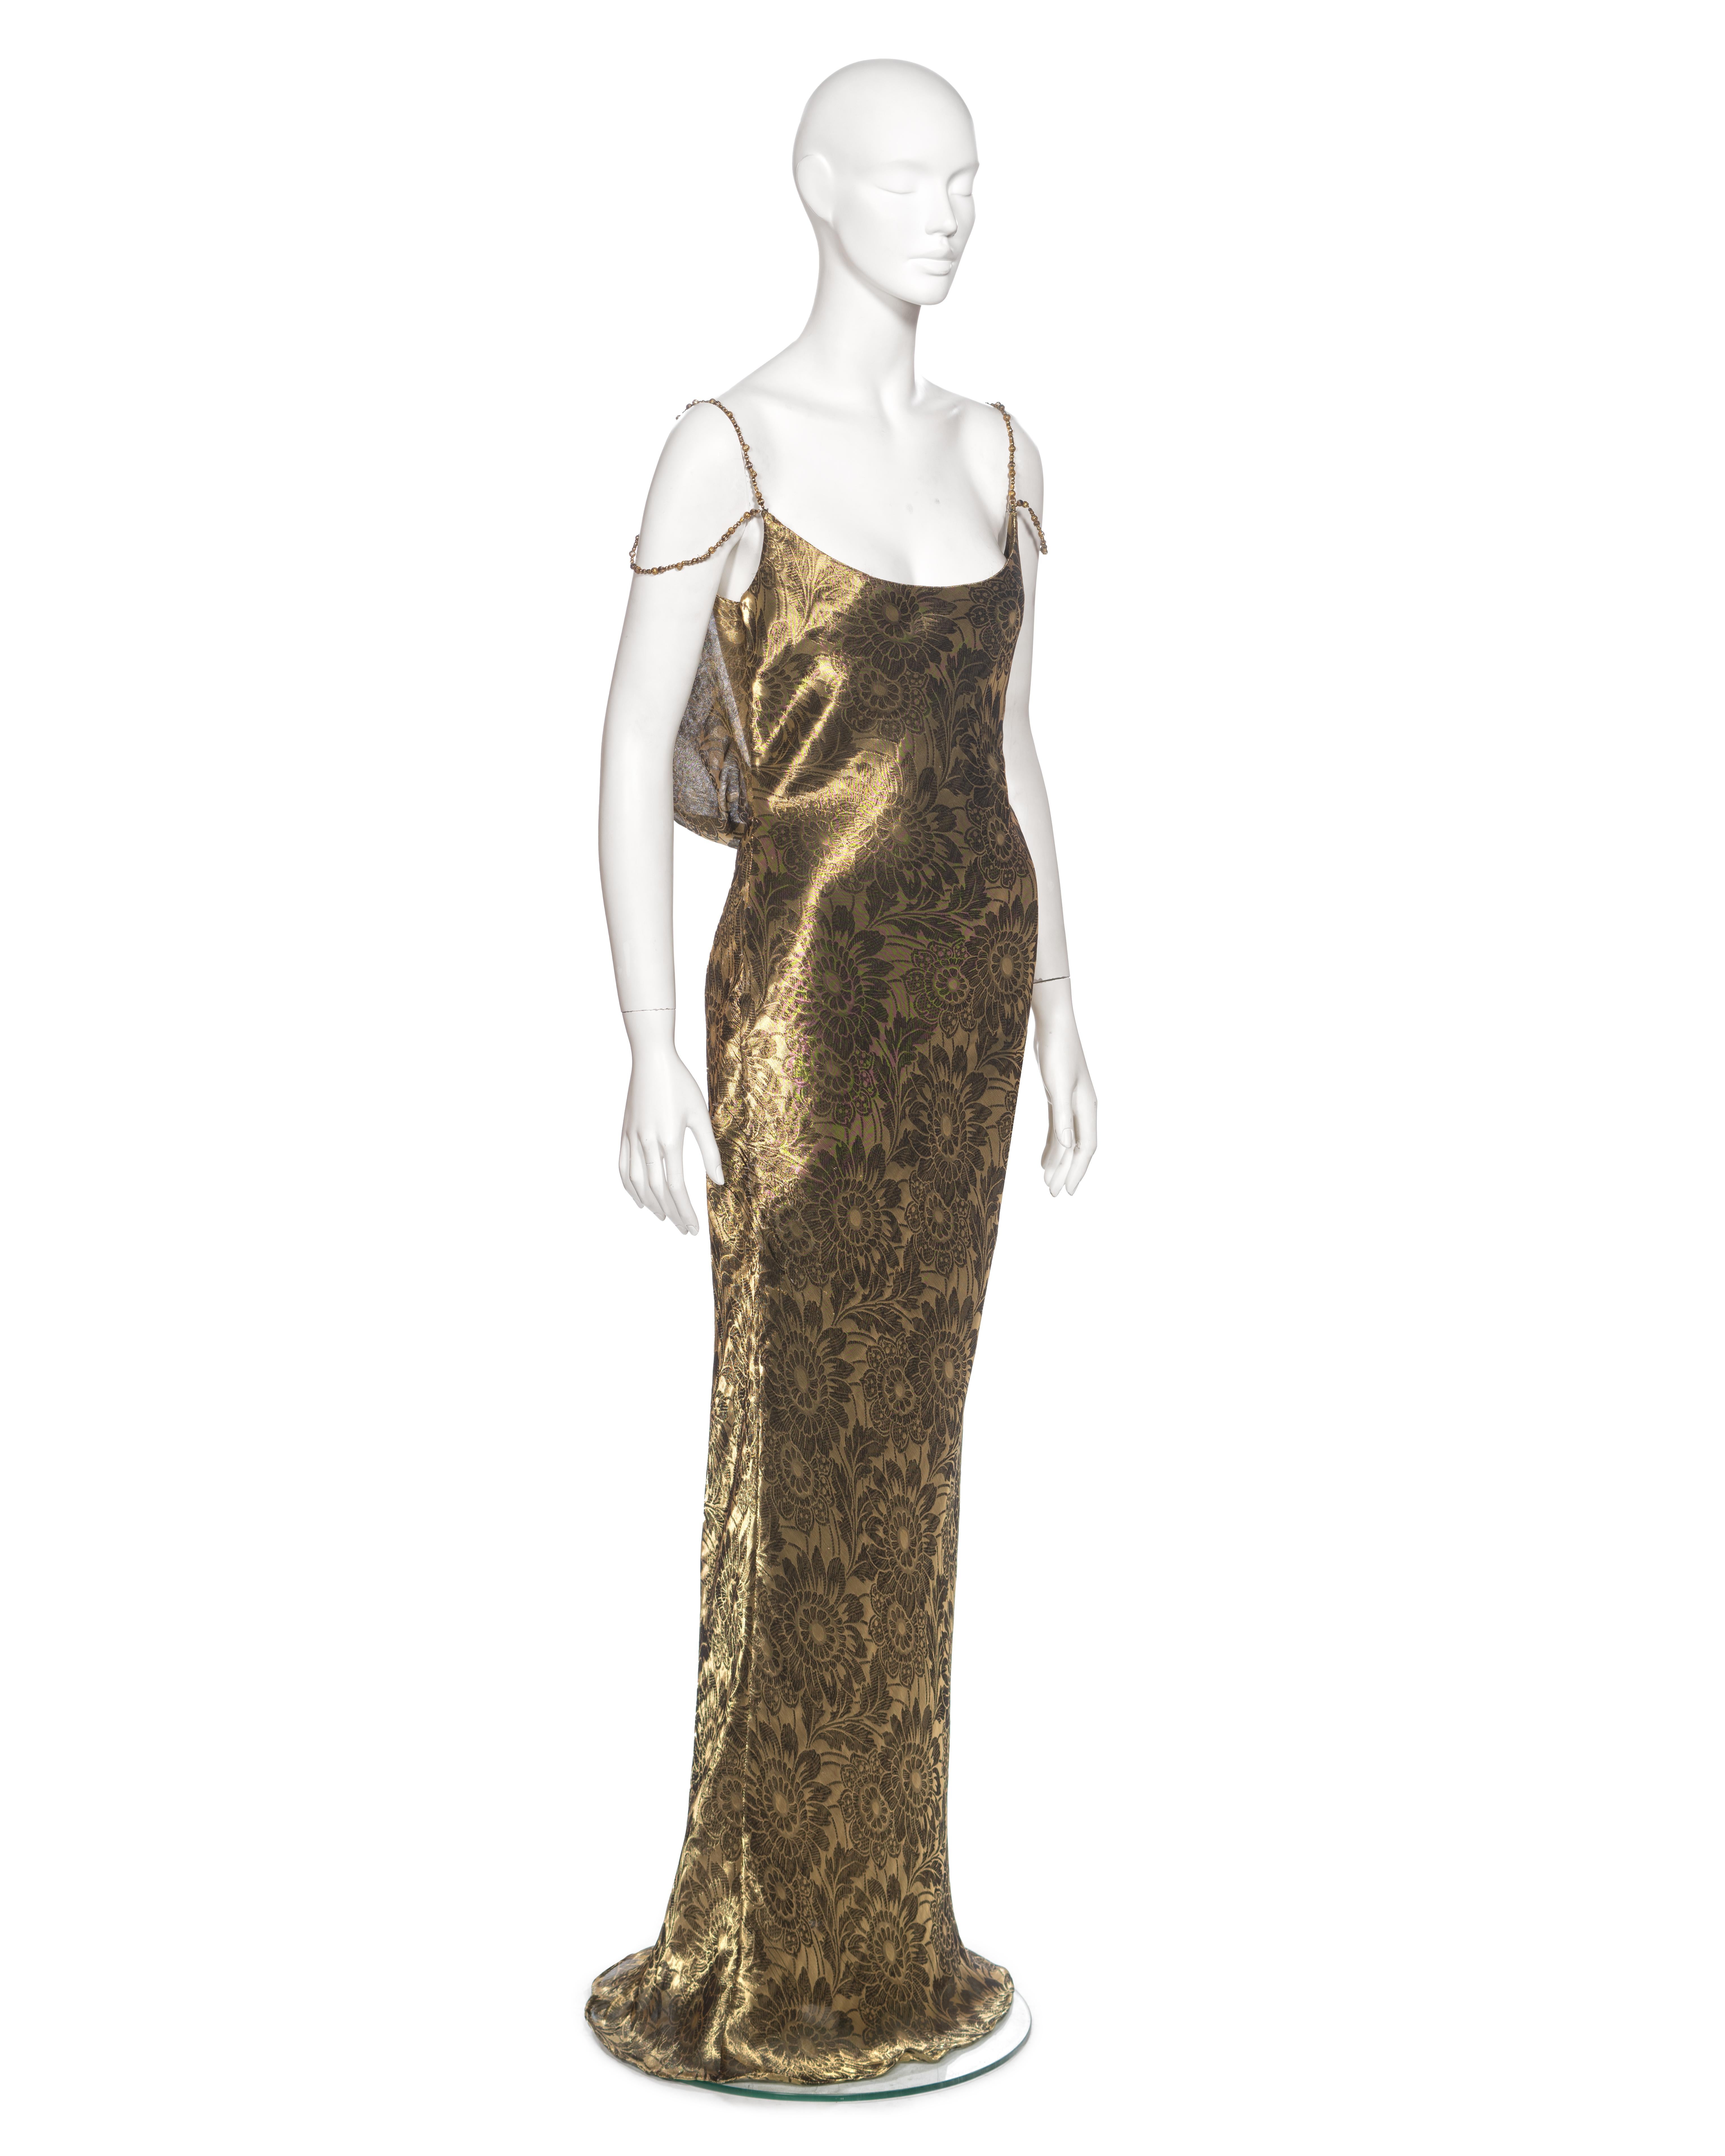 Christian Dior by John Galliano Metallic Antique Gold Evening Dress, FW 1998 For Sale 7